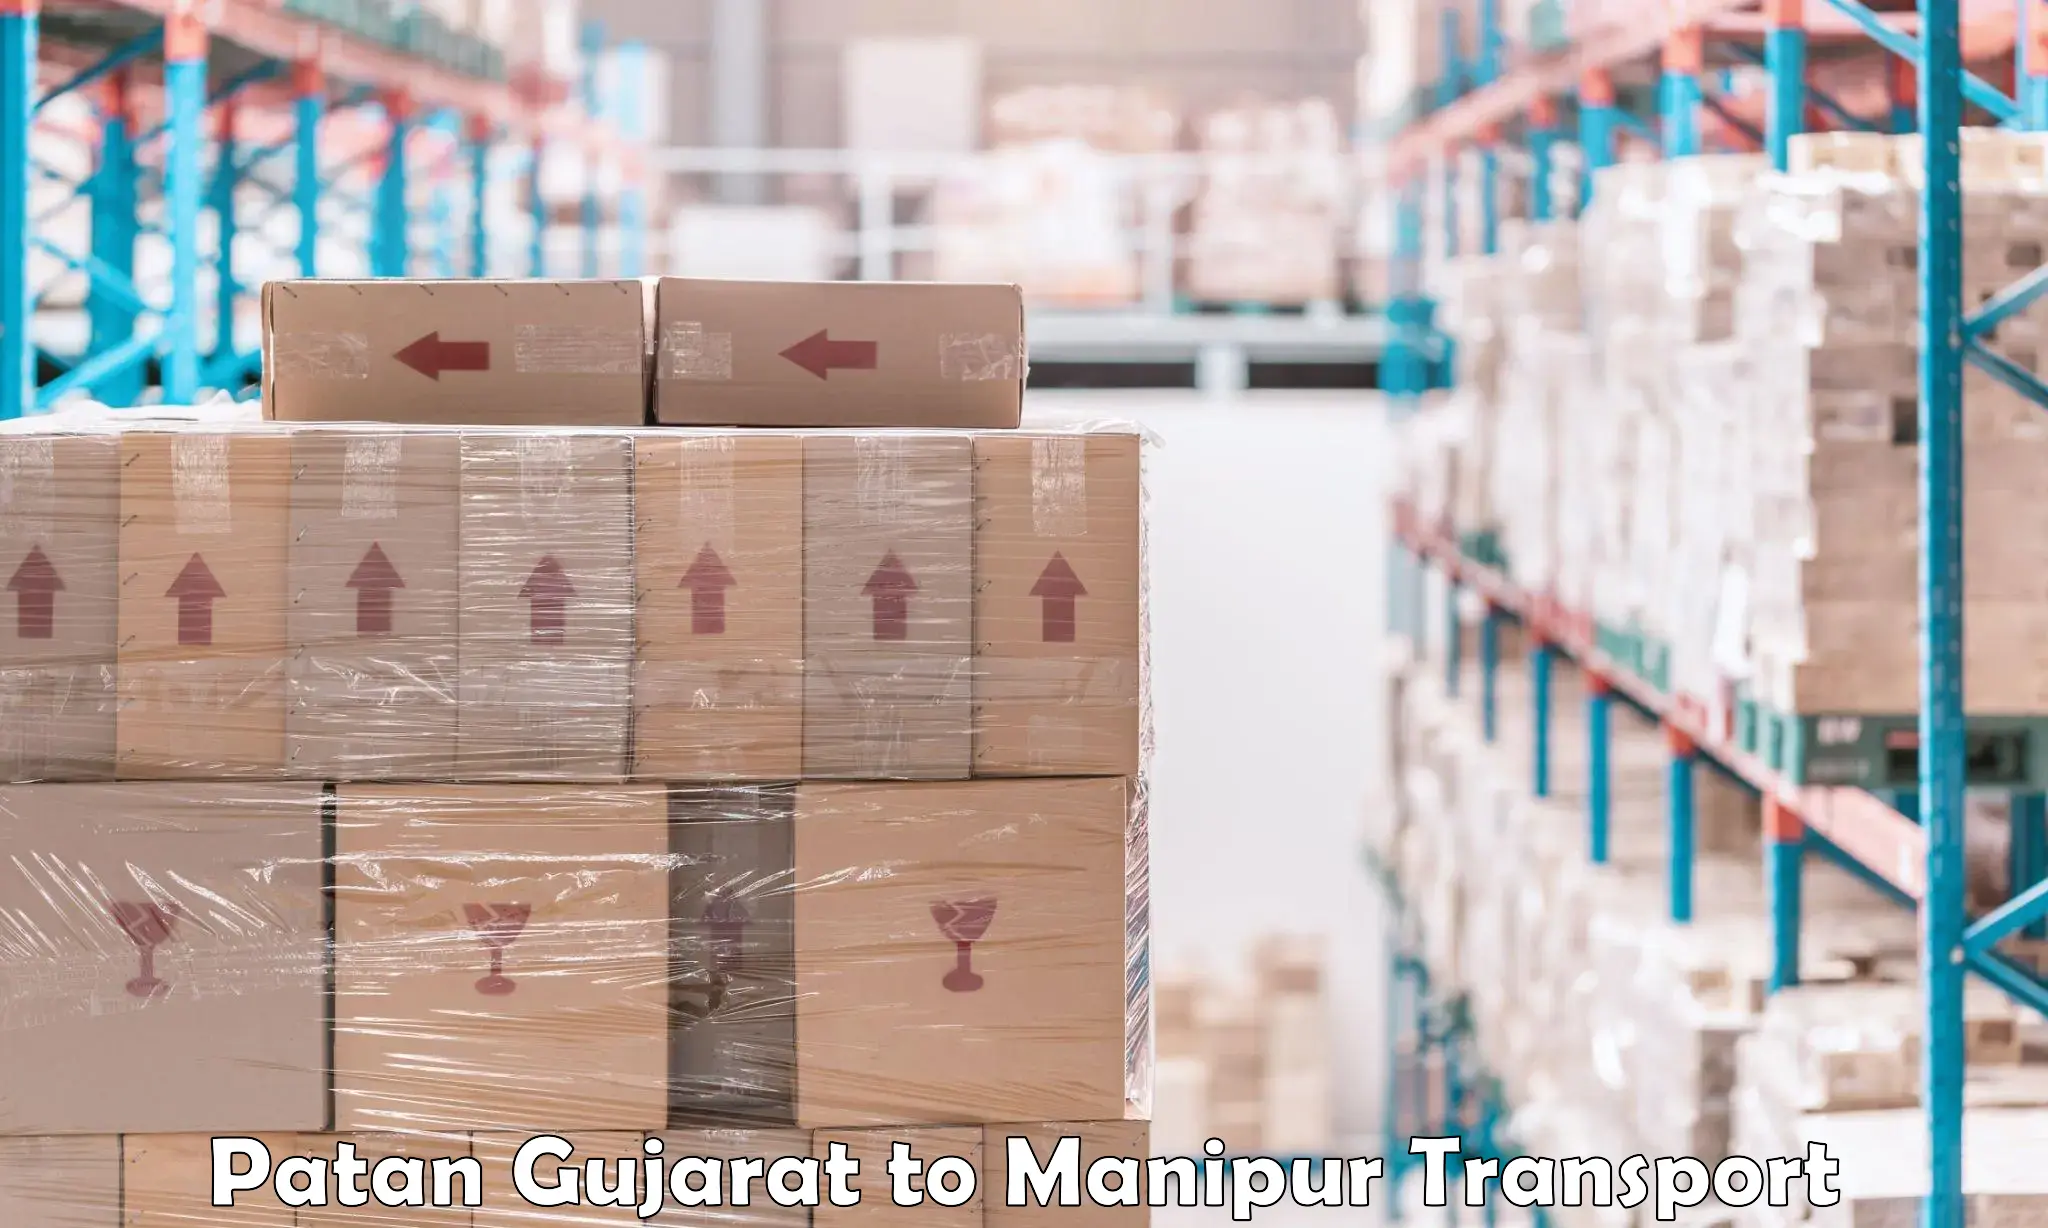 Container transport service Patan Gujarat to Manipur